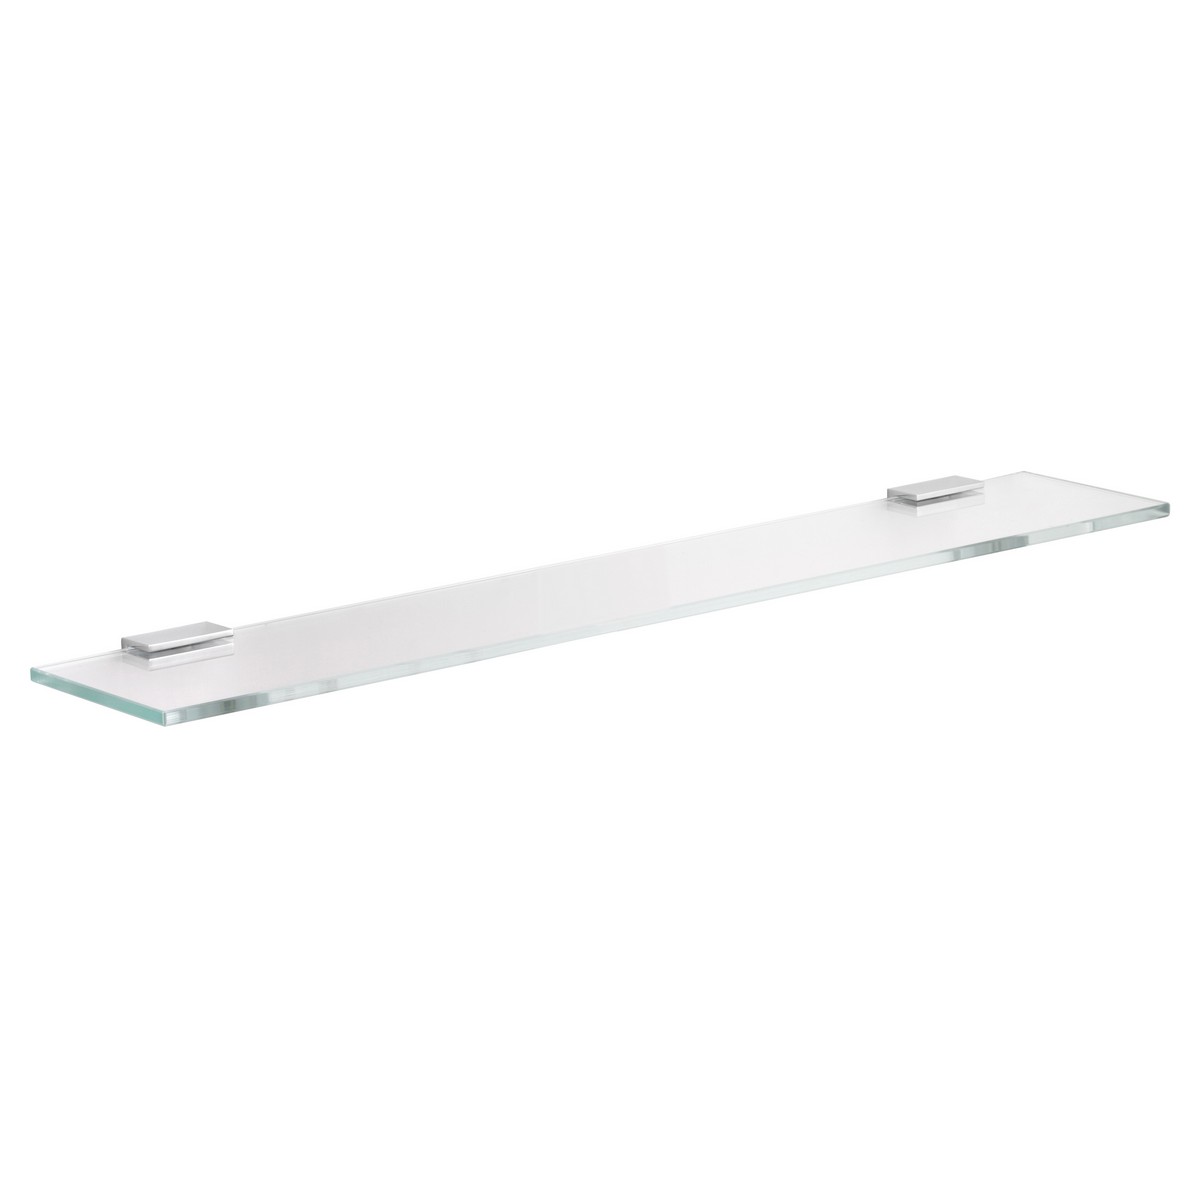 KEUCO 12710015800 MOLL 31 1/2 INCH WALL MOUNTED GLASS SHELF WITH BRACKETS IN POLISHED CHROME